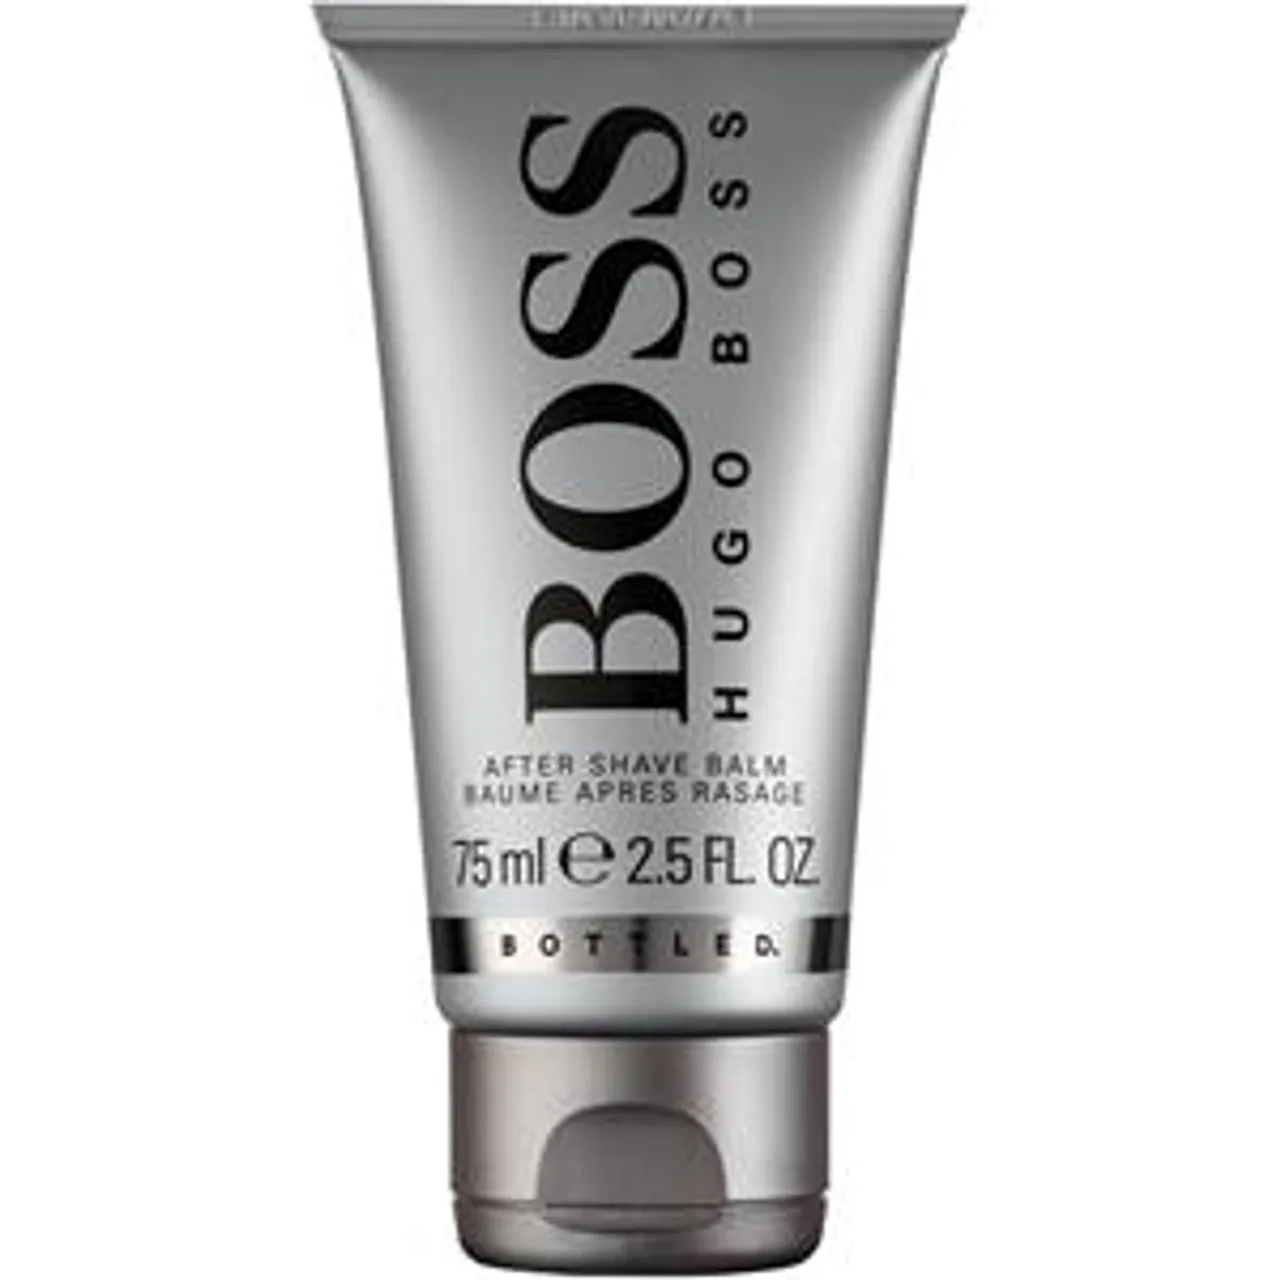 Hugo Boss After Shave Balm 1 75 ml